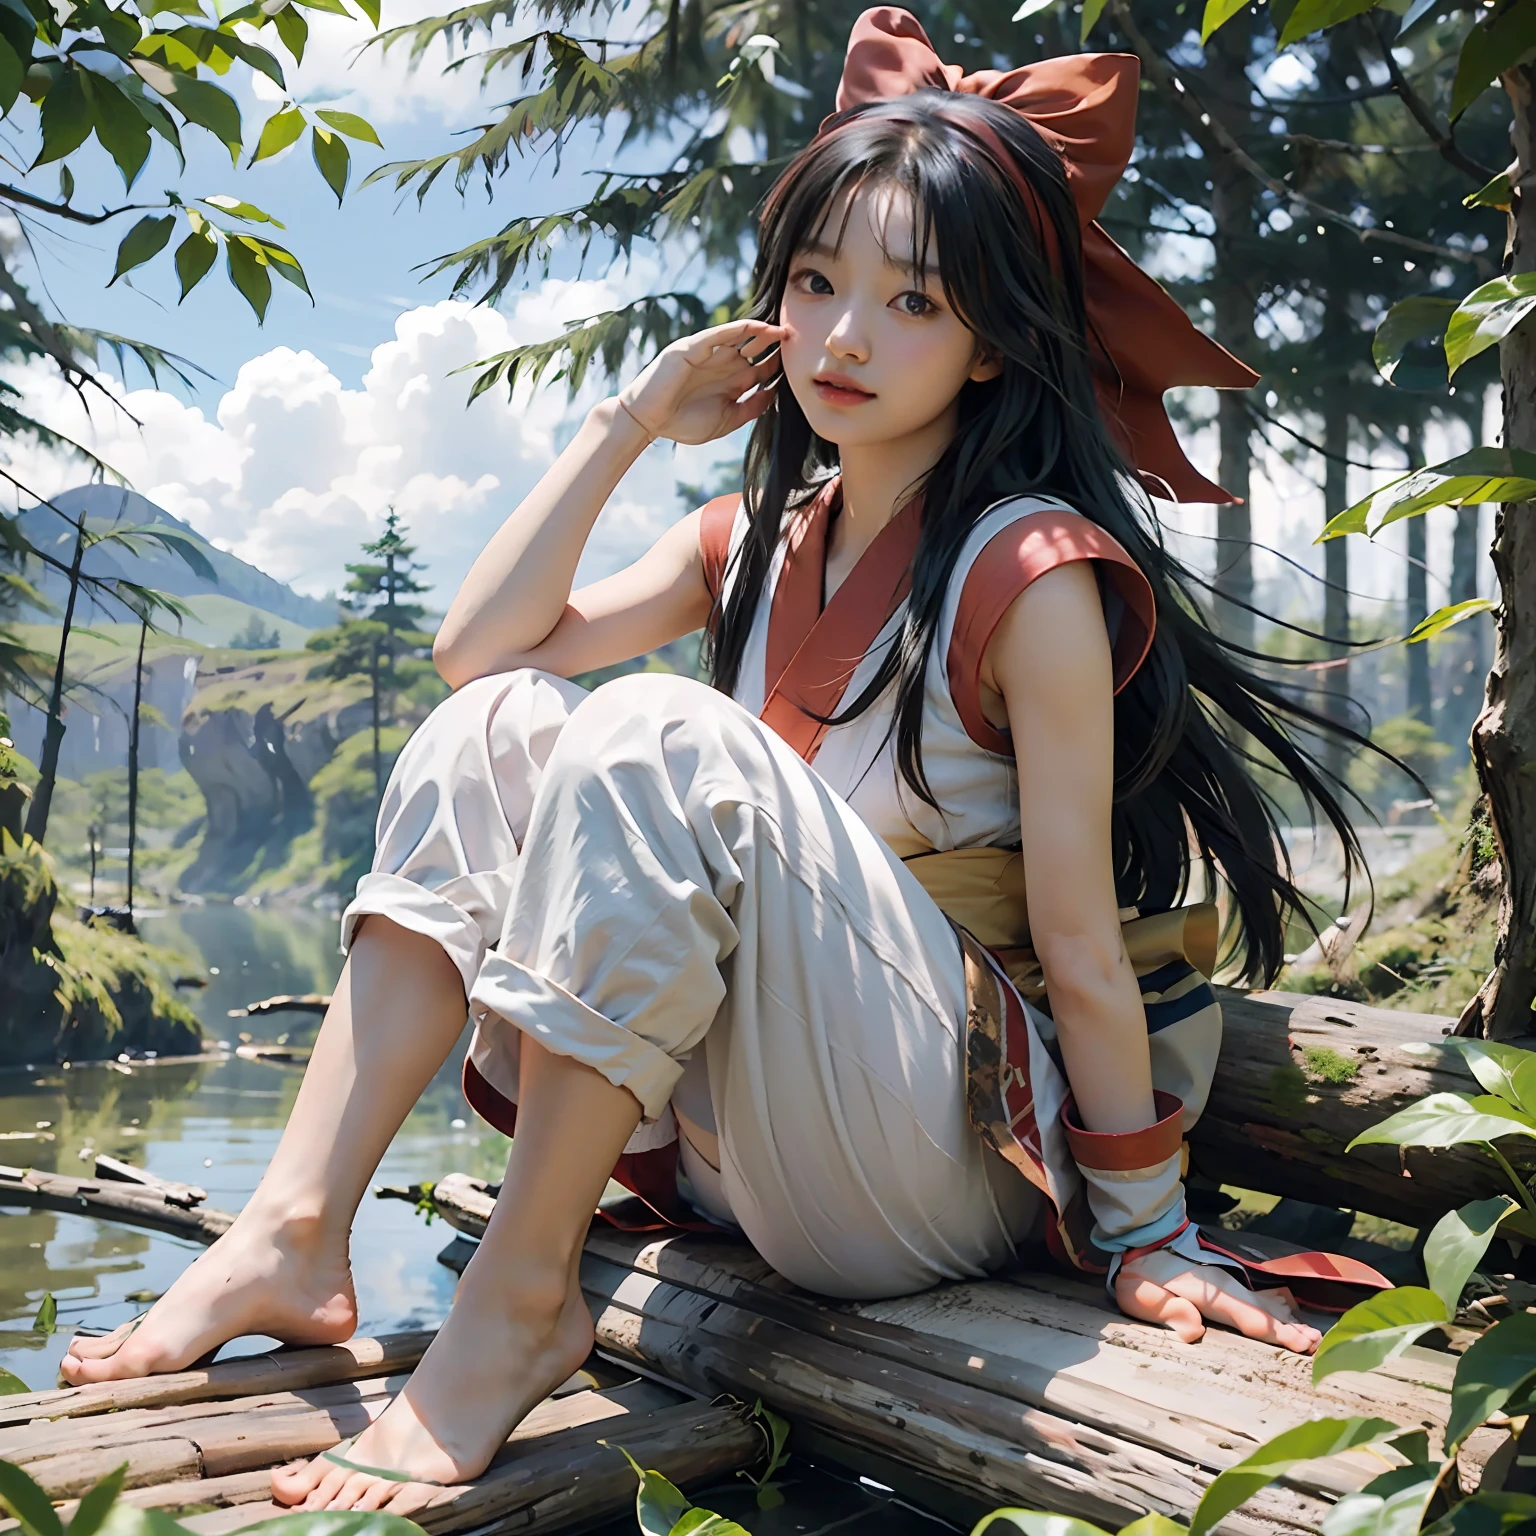 Masterpiece, best quality,1girl in, Sitting on a log、Lake under the log、Red bow, bow, length hair, Hair Bow, ainu clothes, solo, Hair Band, a bird, black har, Fingerless gloves, Half-sleeved, gloves, sash, Underpants, bangss, red hairband, missiles, , Brown-eyed, White pants, (Foot Focus、Naked foot、tiptoes、Sole of one's feet:1.2)、common, Nakoruru, lightl smile, Official art, from frontal、from from below、(dynamic angle)、nature backdrop, Serve、Onmyoji style、Hi-Def、Dramatic lighting and shadows、Solar flares、Blurred foreground